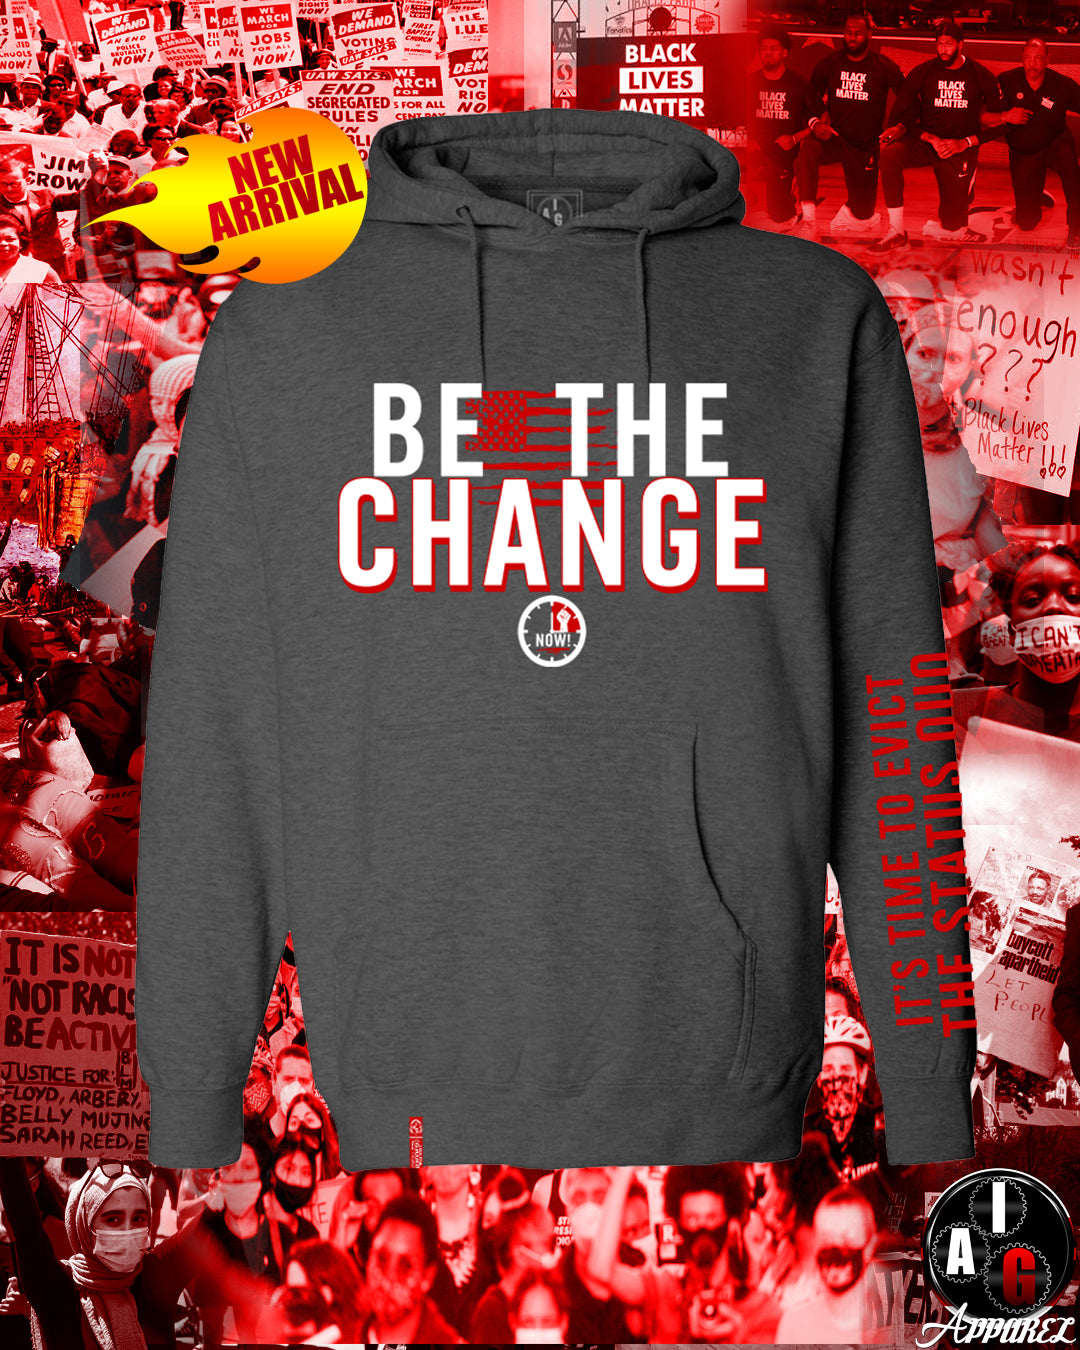 Be The Change Hoodie Special